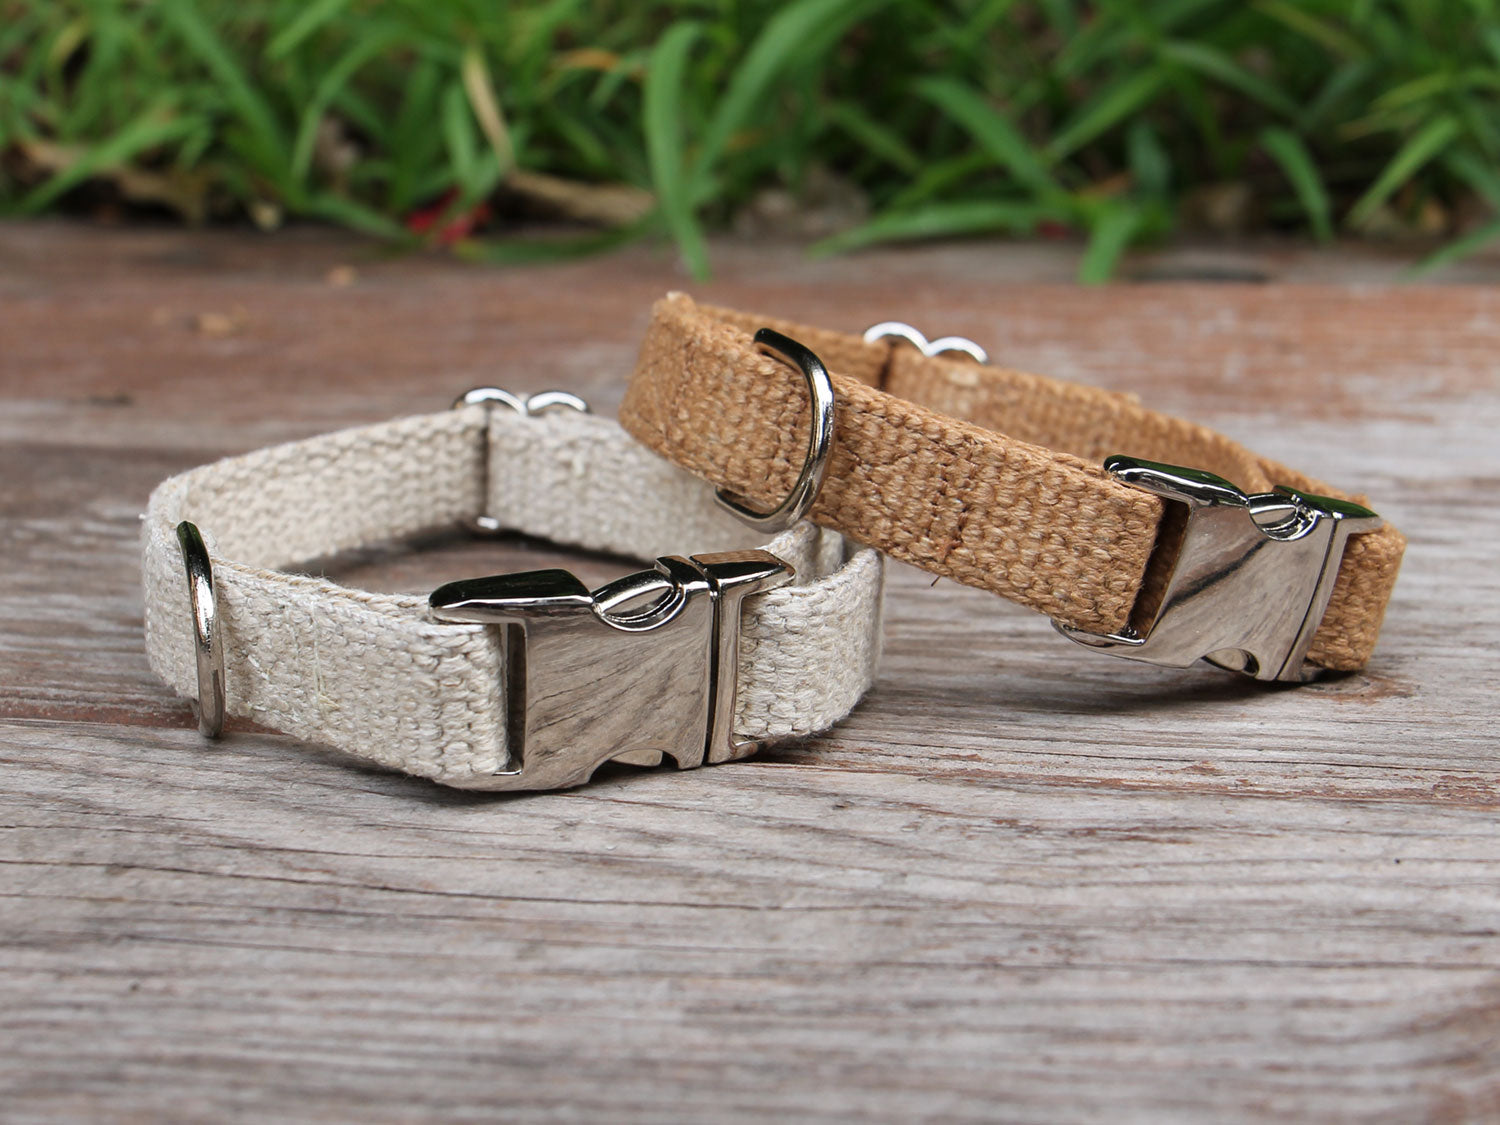 Just Hemp Dog Collar - Natural and Tea-Stained